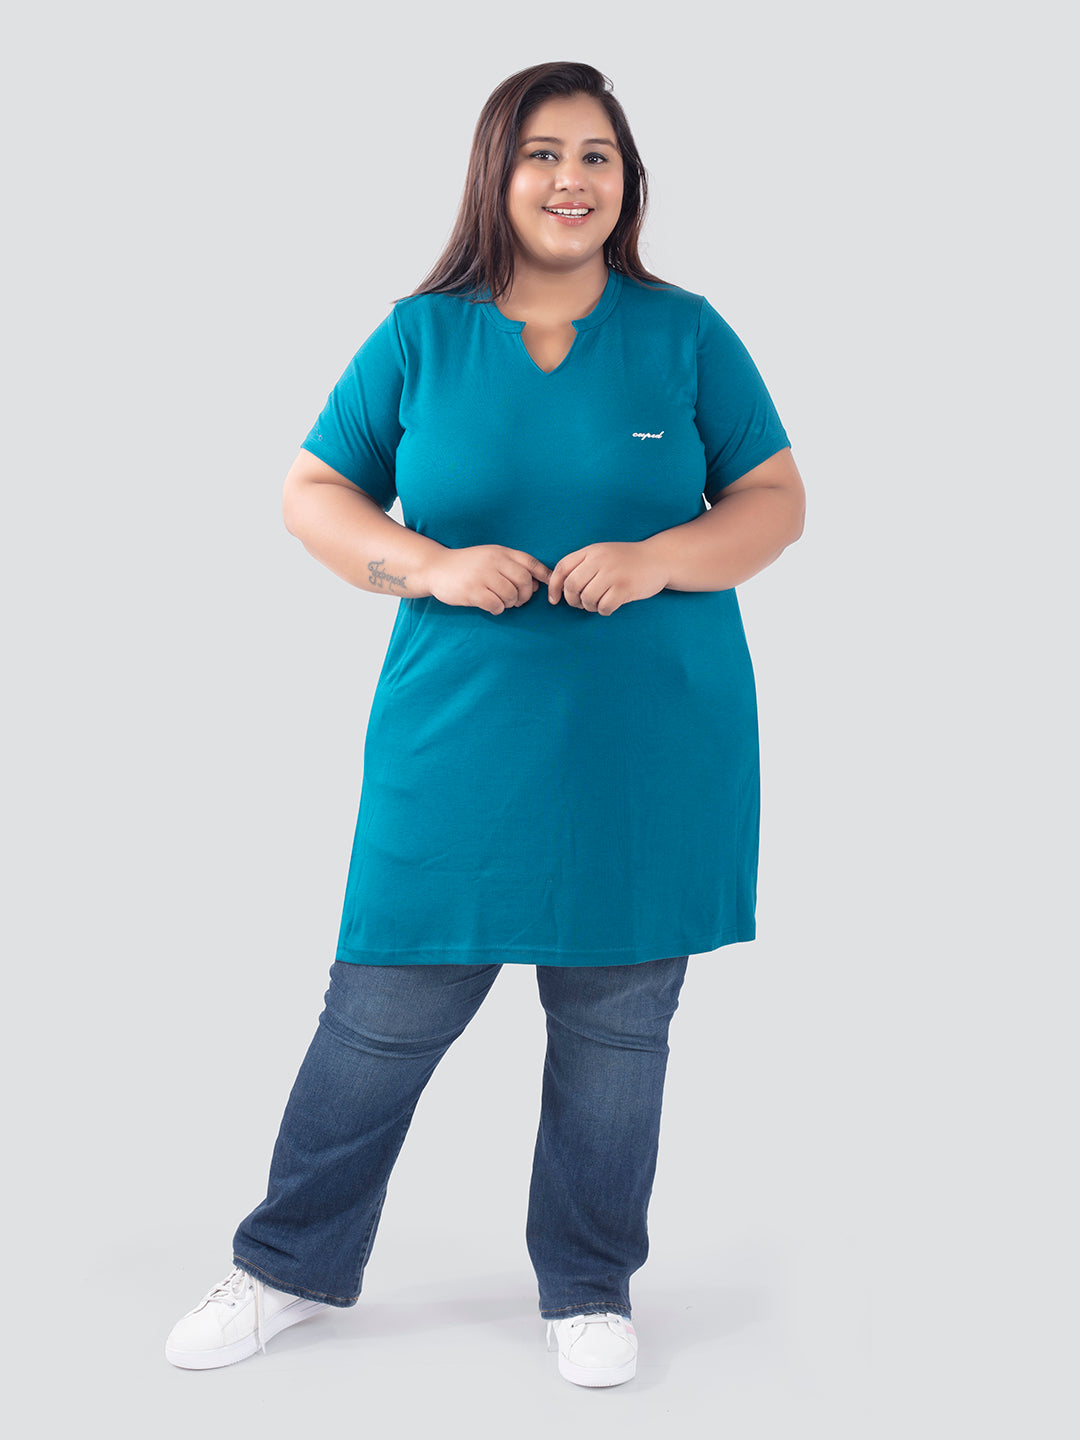 Stylish Teal Blue Cotton Plus Size Half Sleeves Long Top For Women Online In India